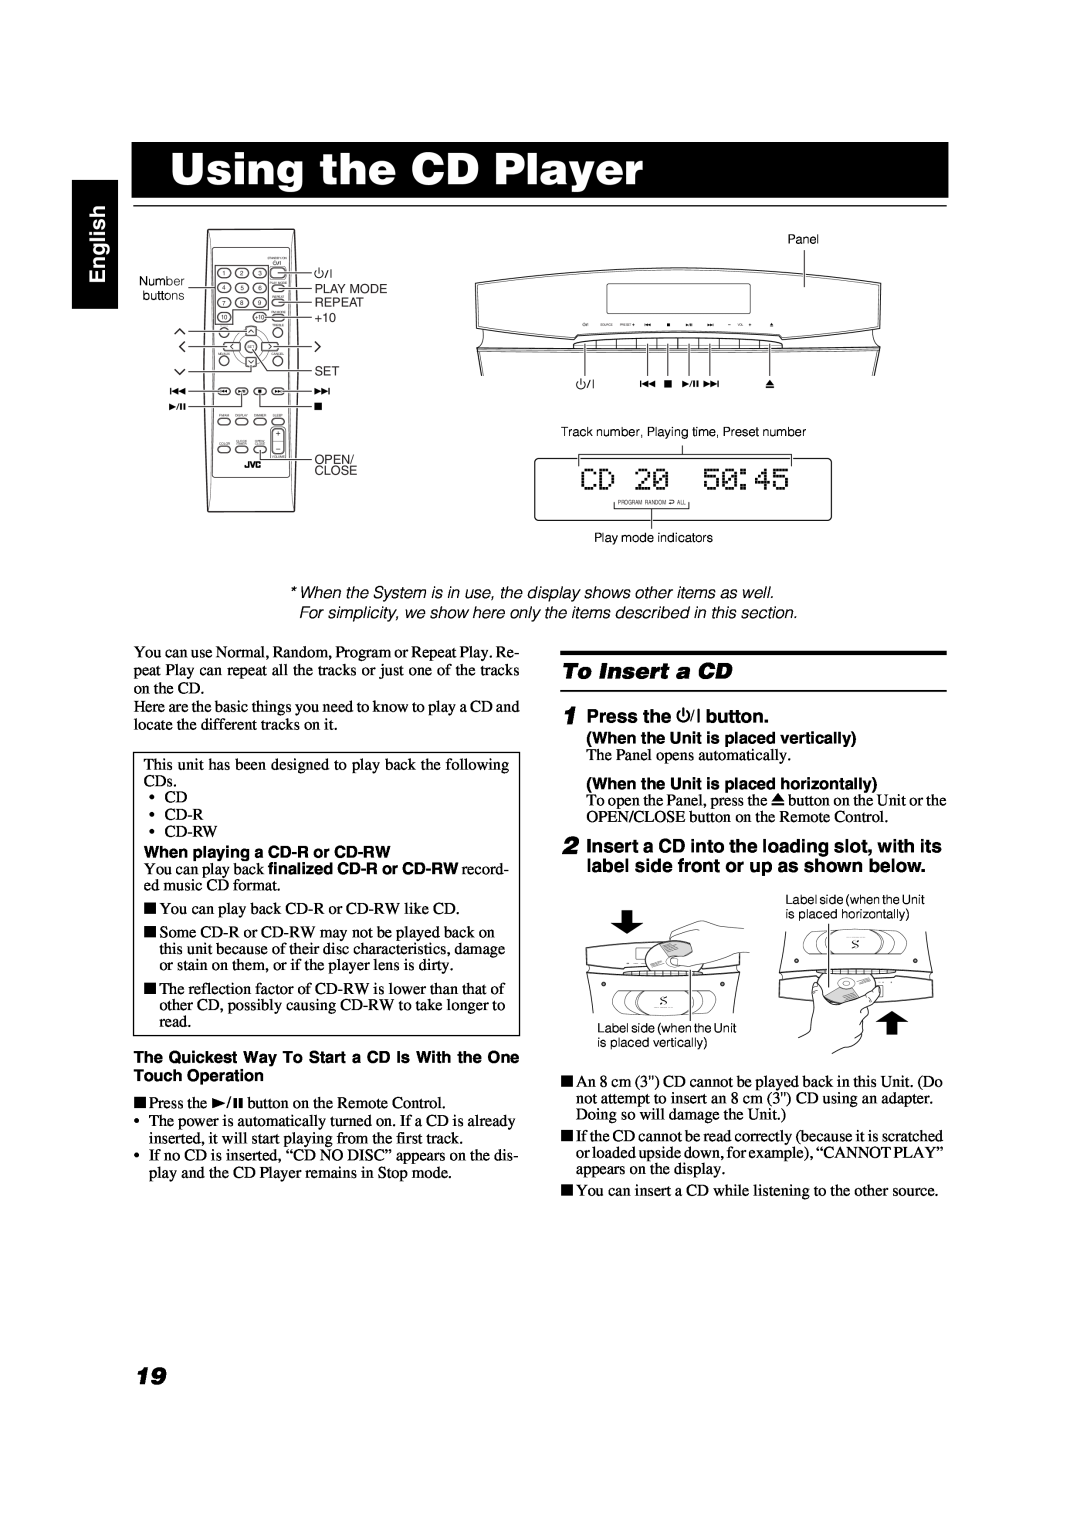 JVC VS-DT2000 manual Using the CD Player, English, To Insert a CD, Press the % button, When playing a CD-Ror CD-RW 